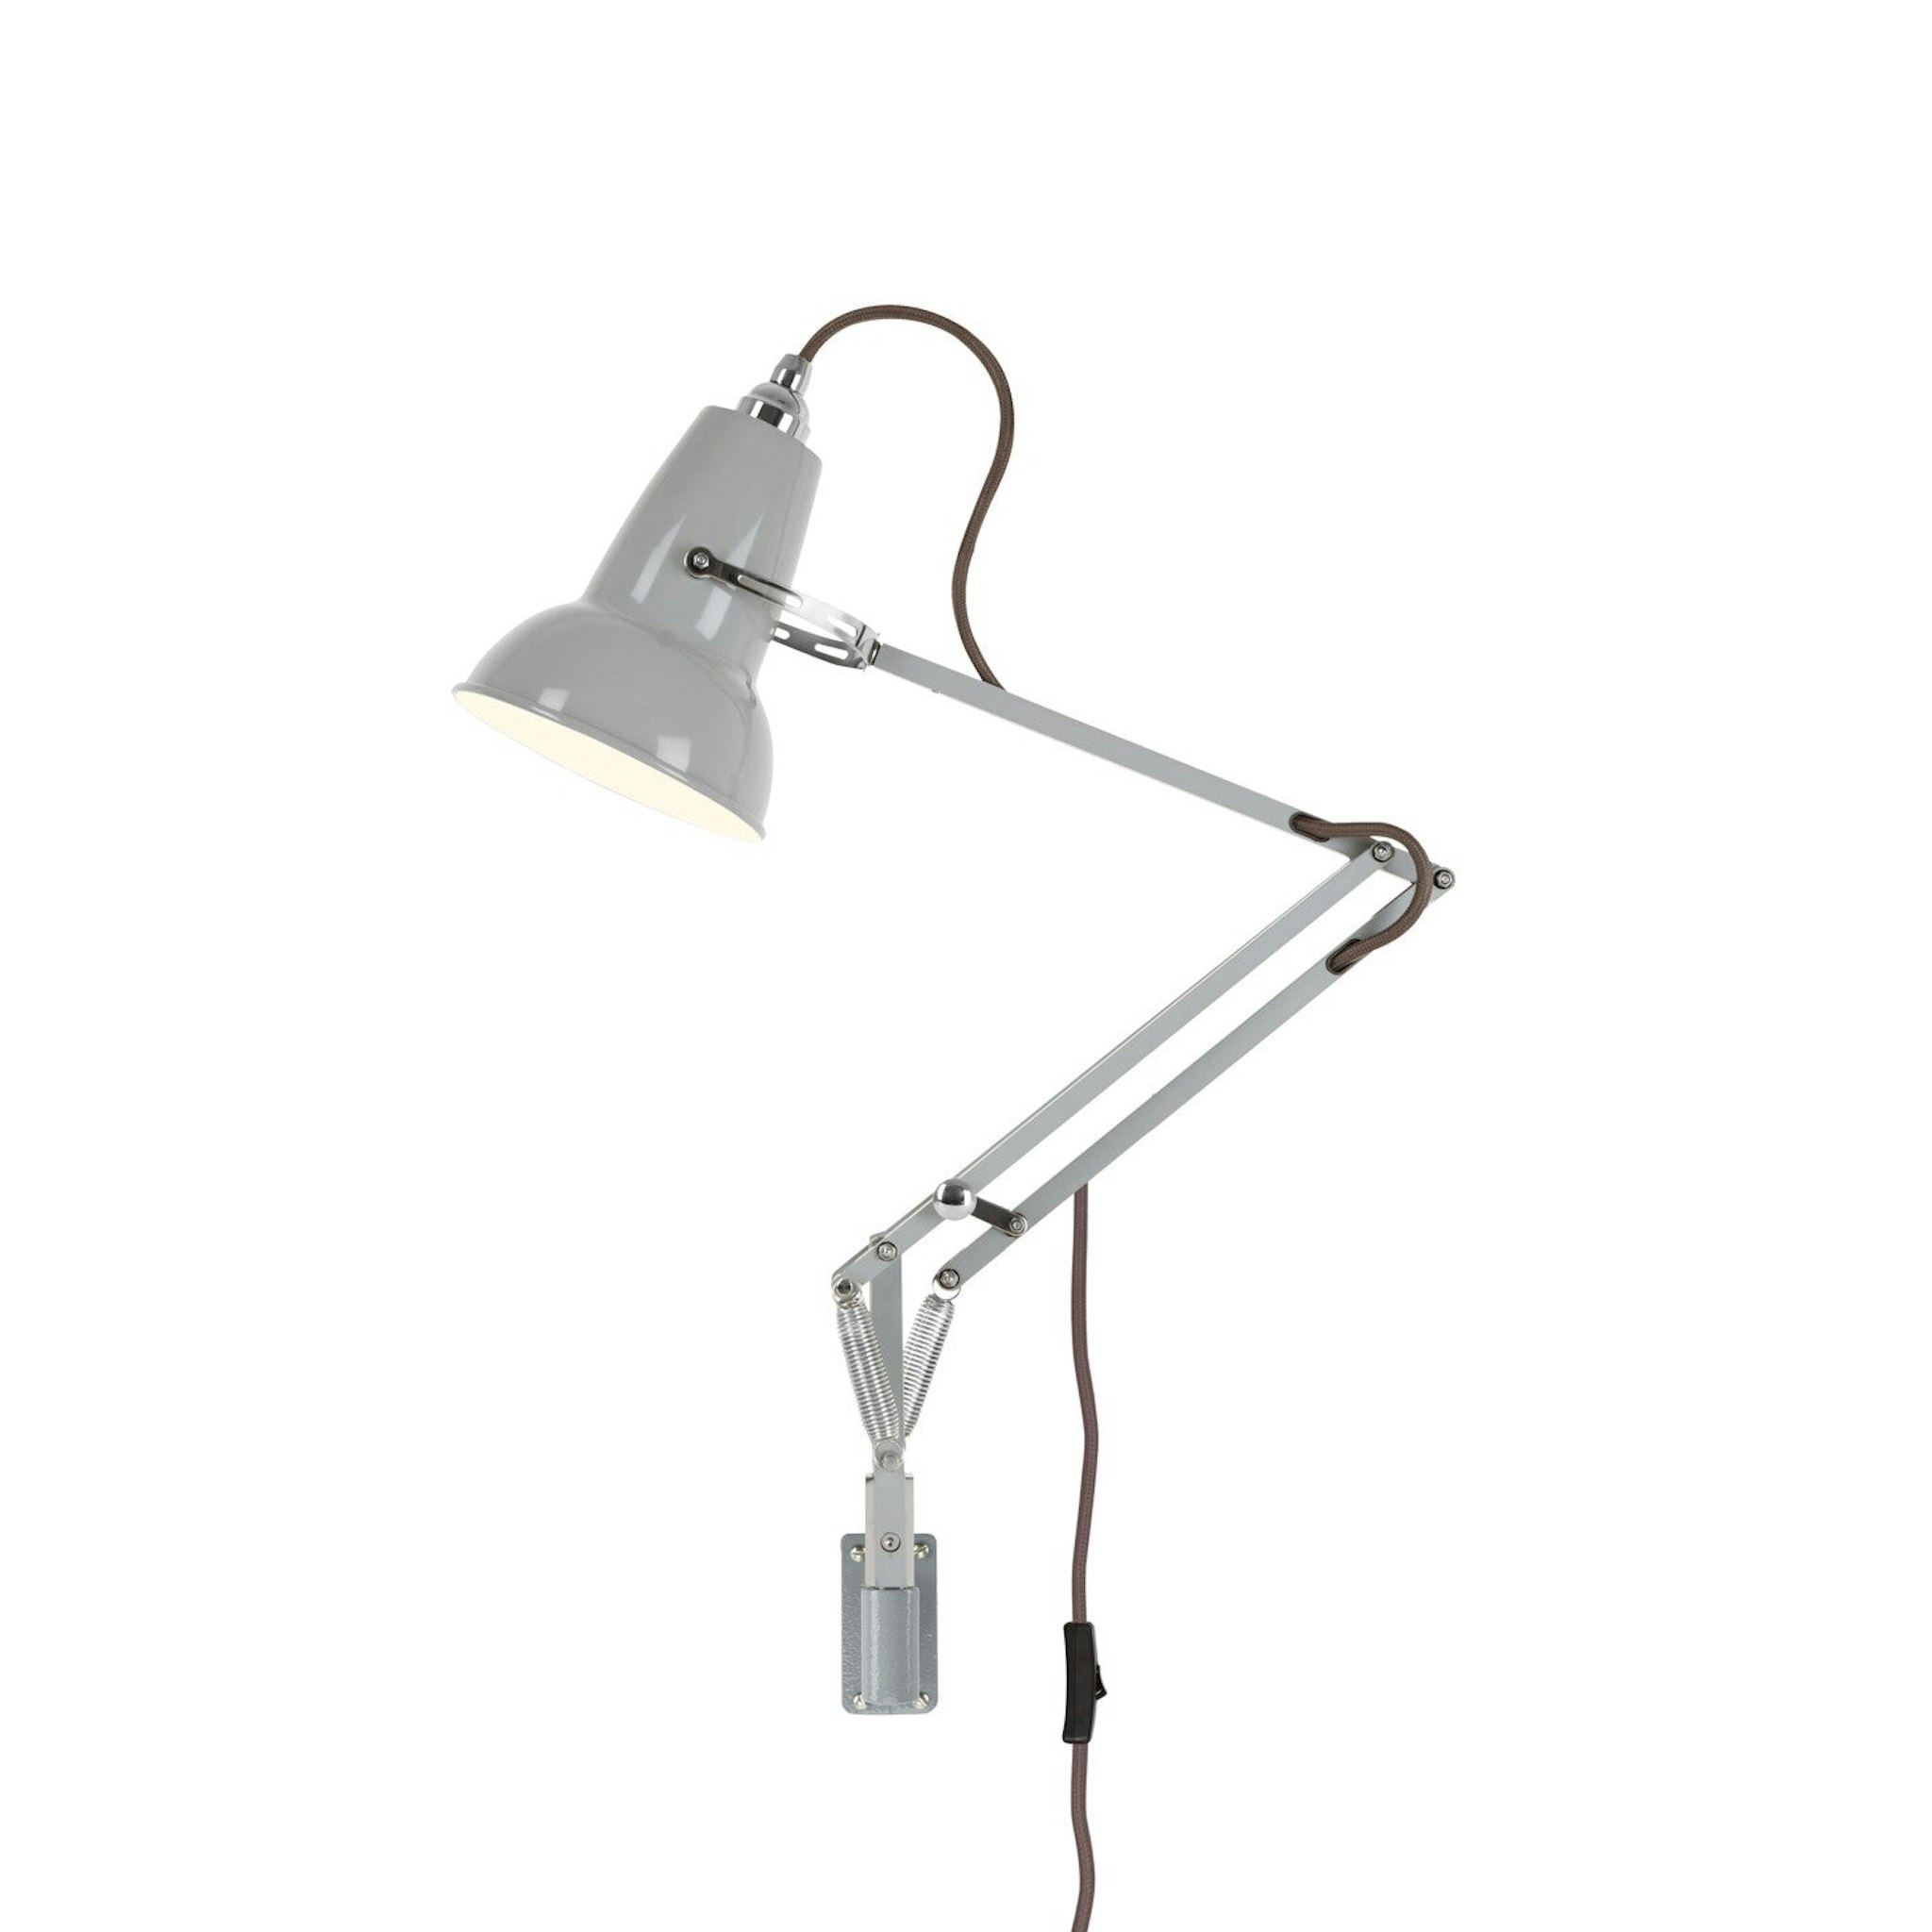 Original 1227 Mini Wall Mounted Lamp by Anglepoise